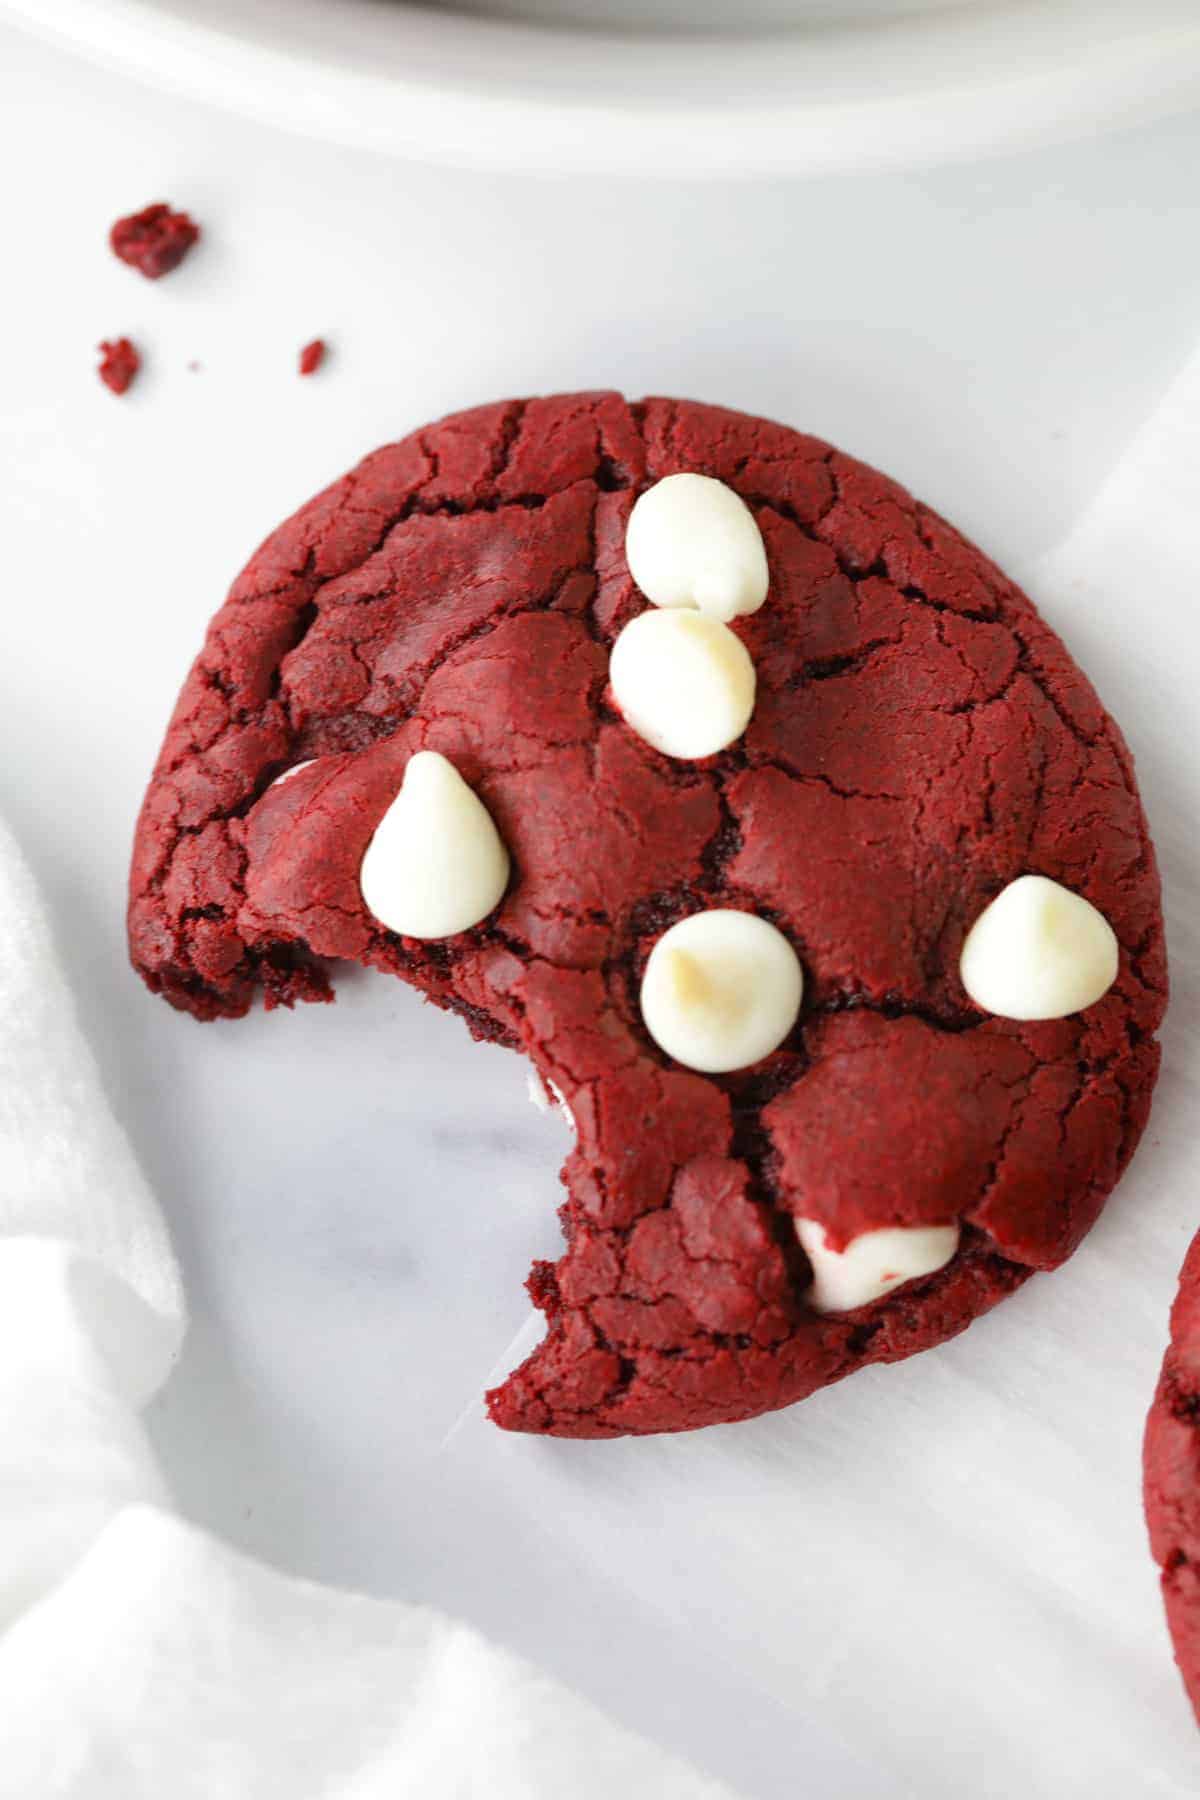 One red velvet cake mix cookie with a bite taken out.